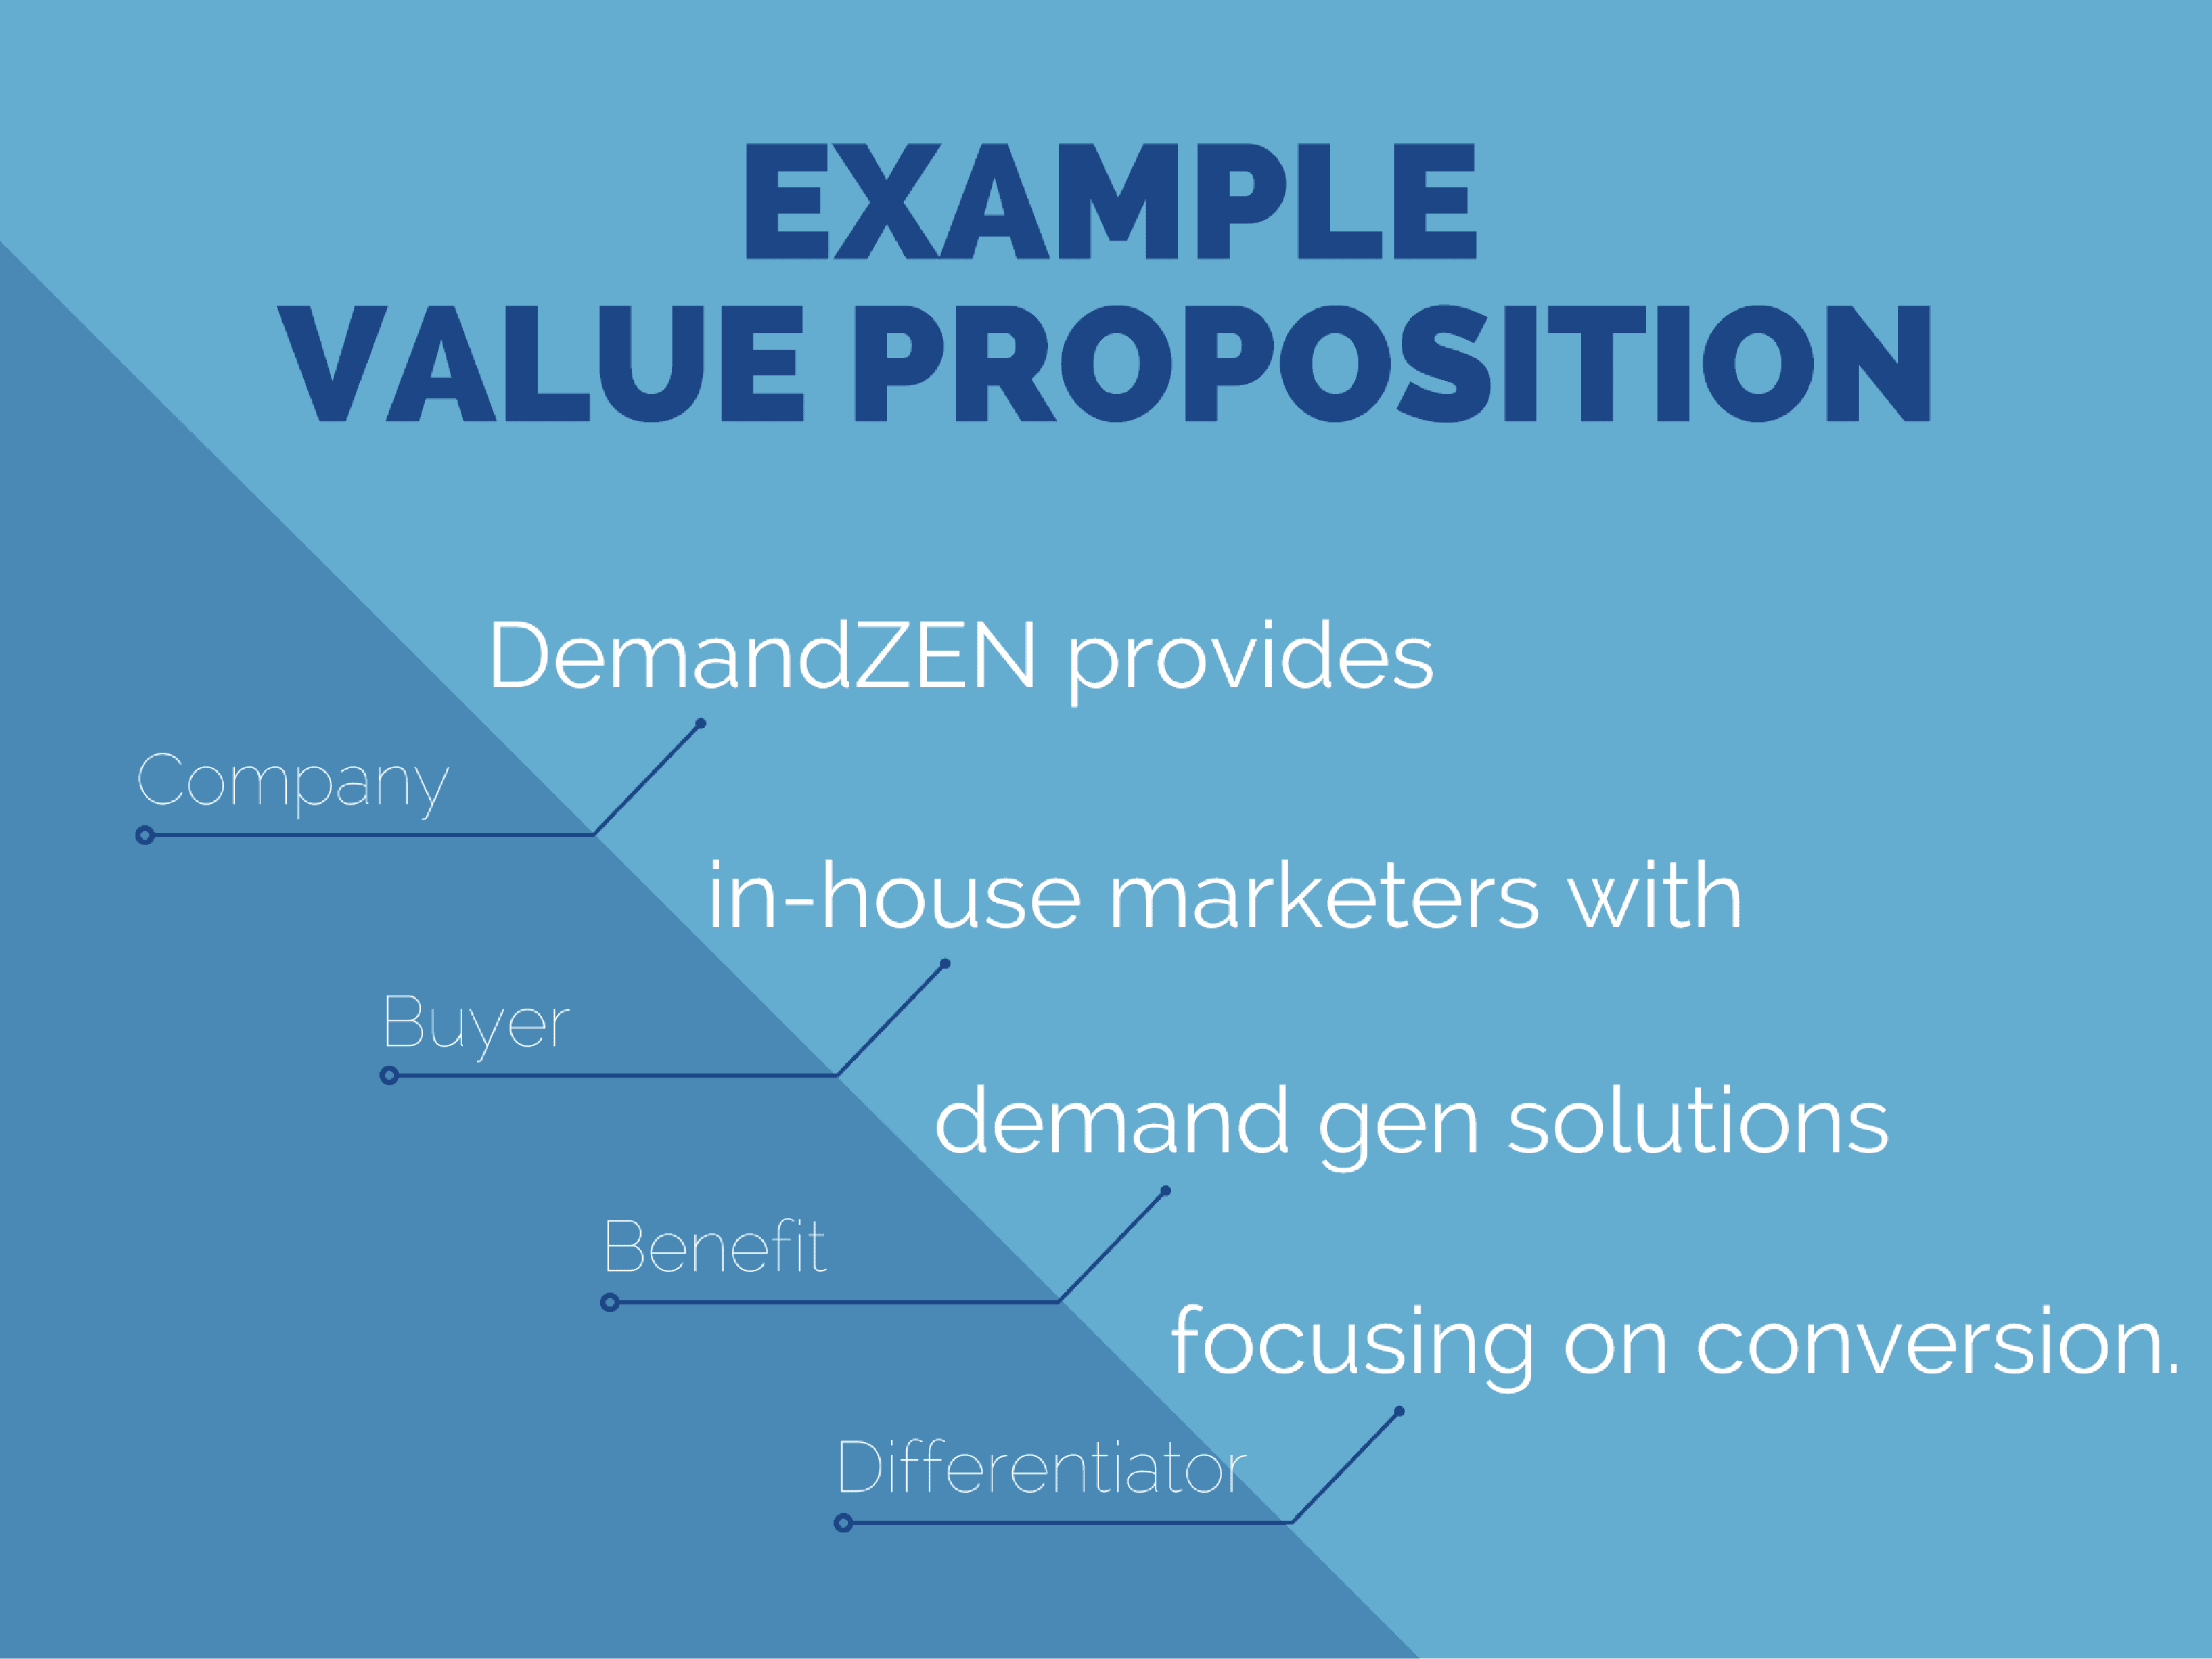 How to write a value proposition